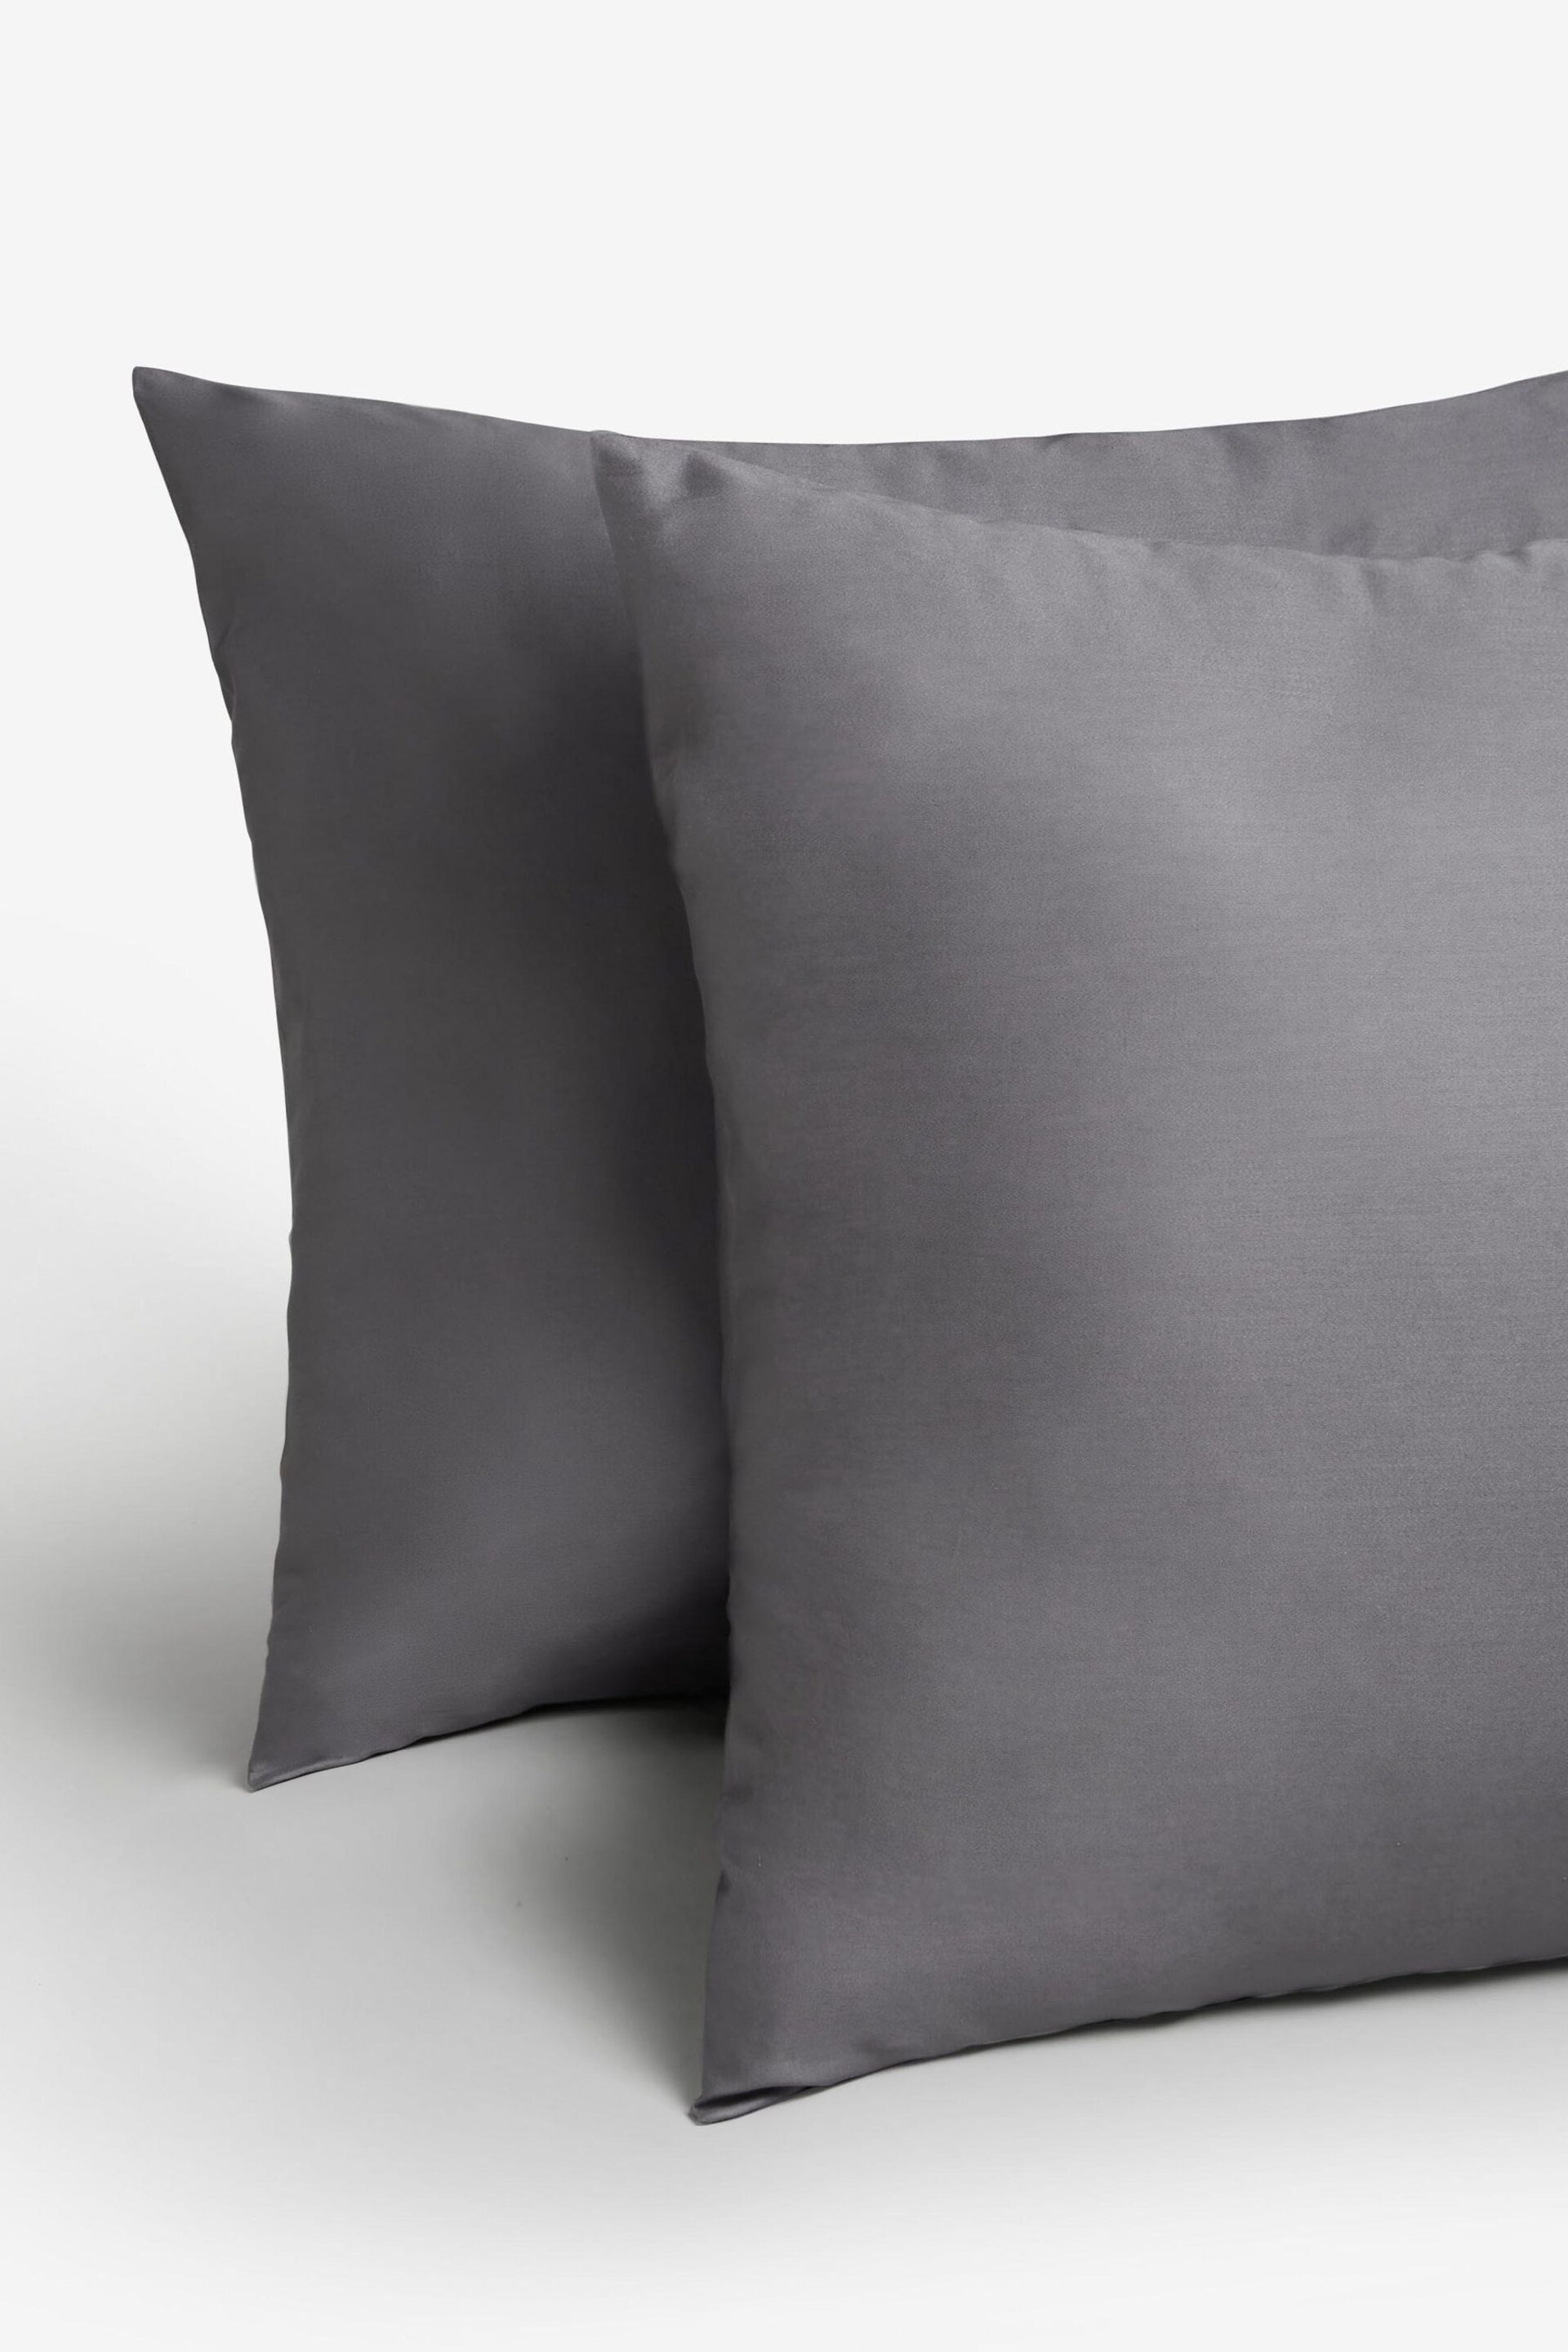 Set of 2 Charcoal Grey Collection Luxe 400 Thread Count 100% Egyptian Cotton Pillowcases - Image 2 of 4